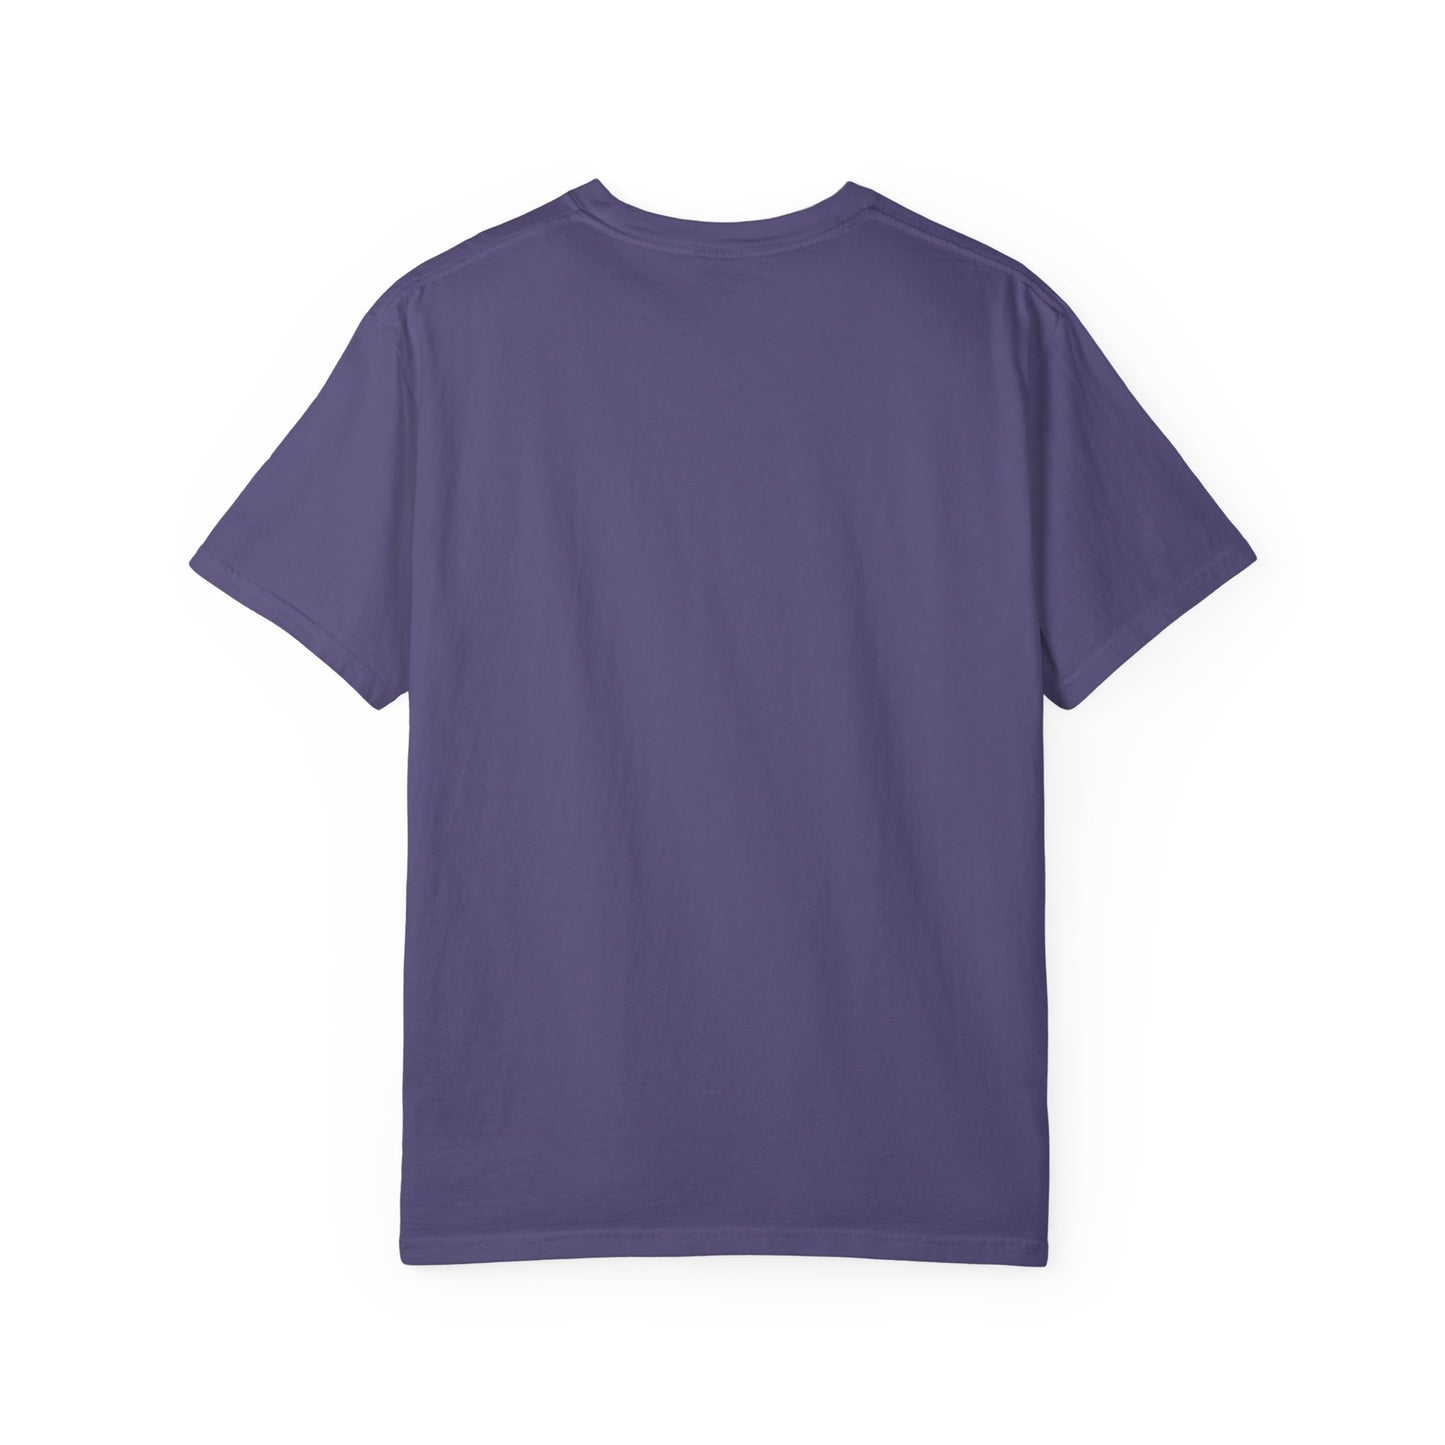 Unisex Comfort Colors T-shirt | Villagers of Mainstrasse VOM Social Clean